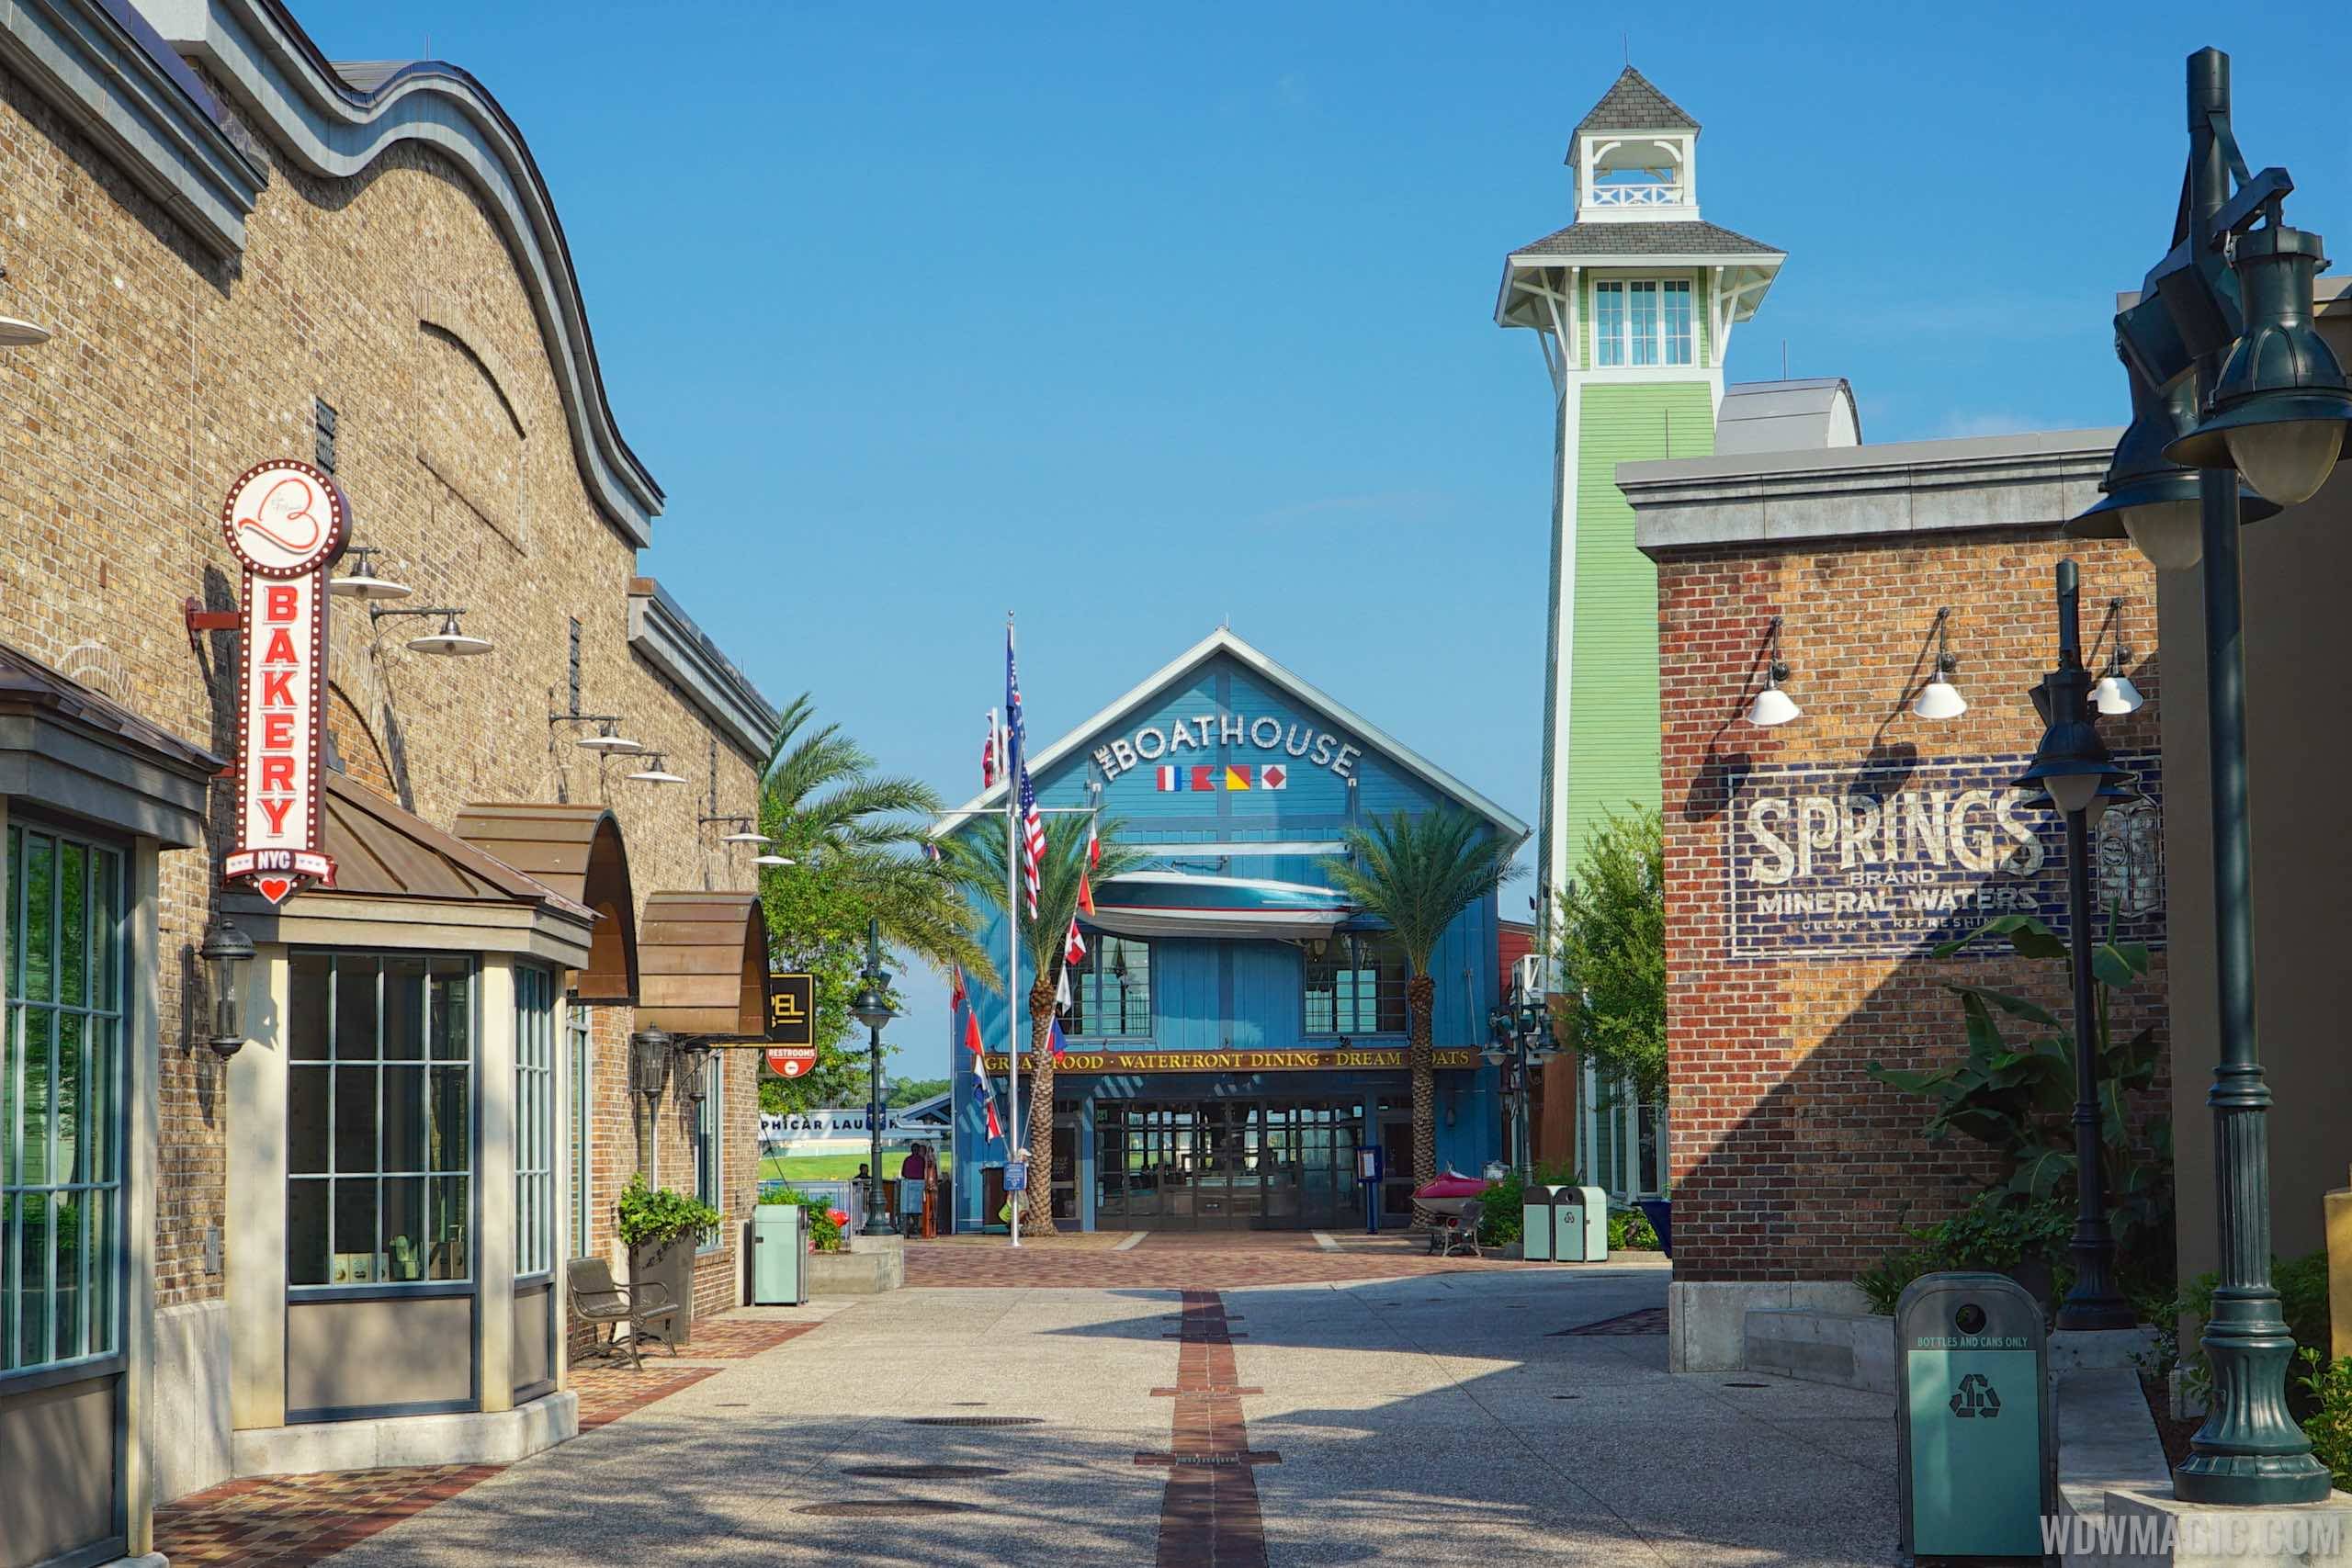 Walt Disney World to reopen theme parks and Disney Springs in phases starting Friday